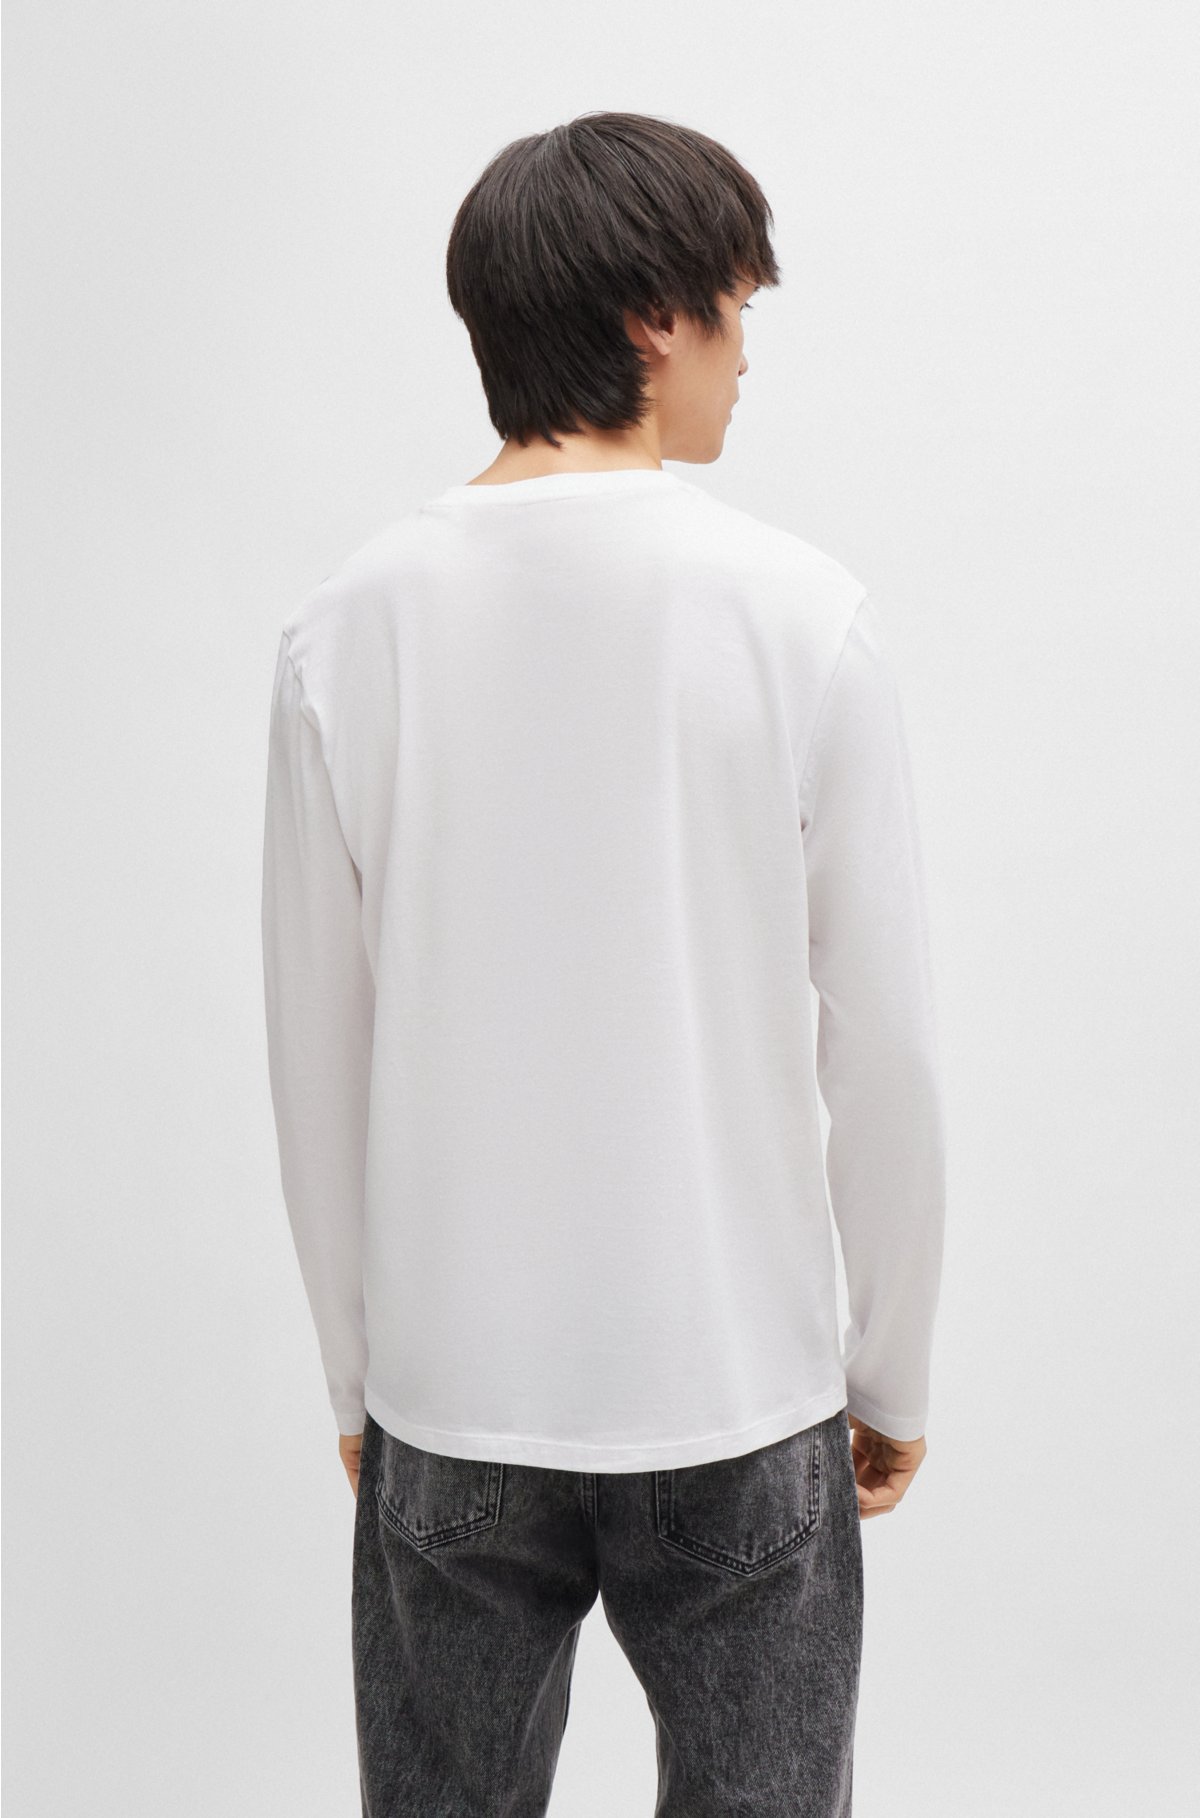 Long-sleeved T-shirt in cotton jersey with logo print, White